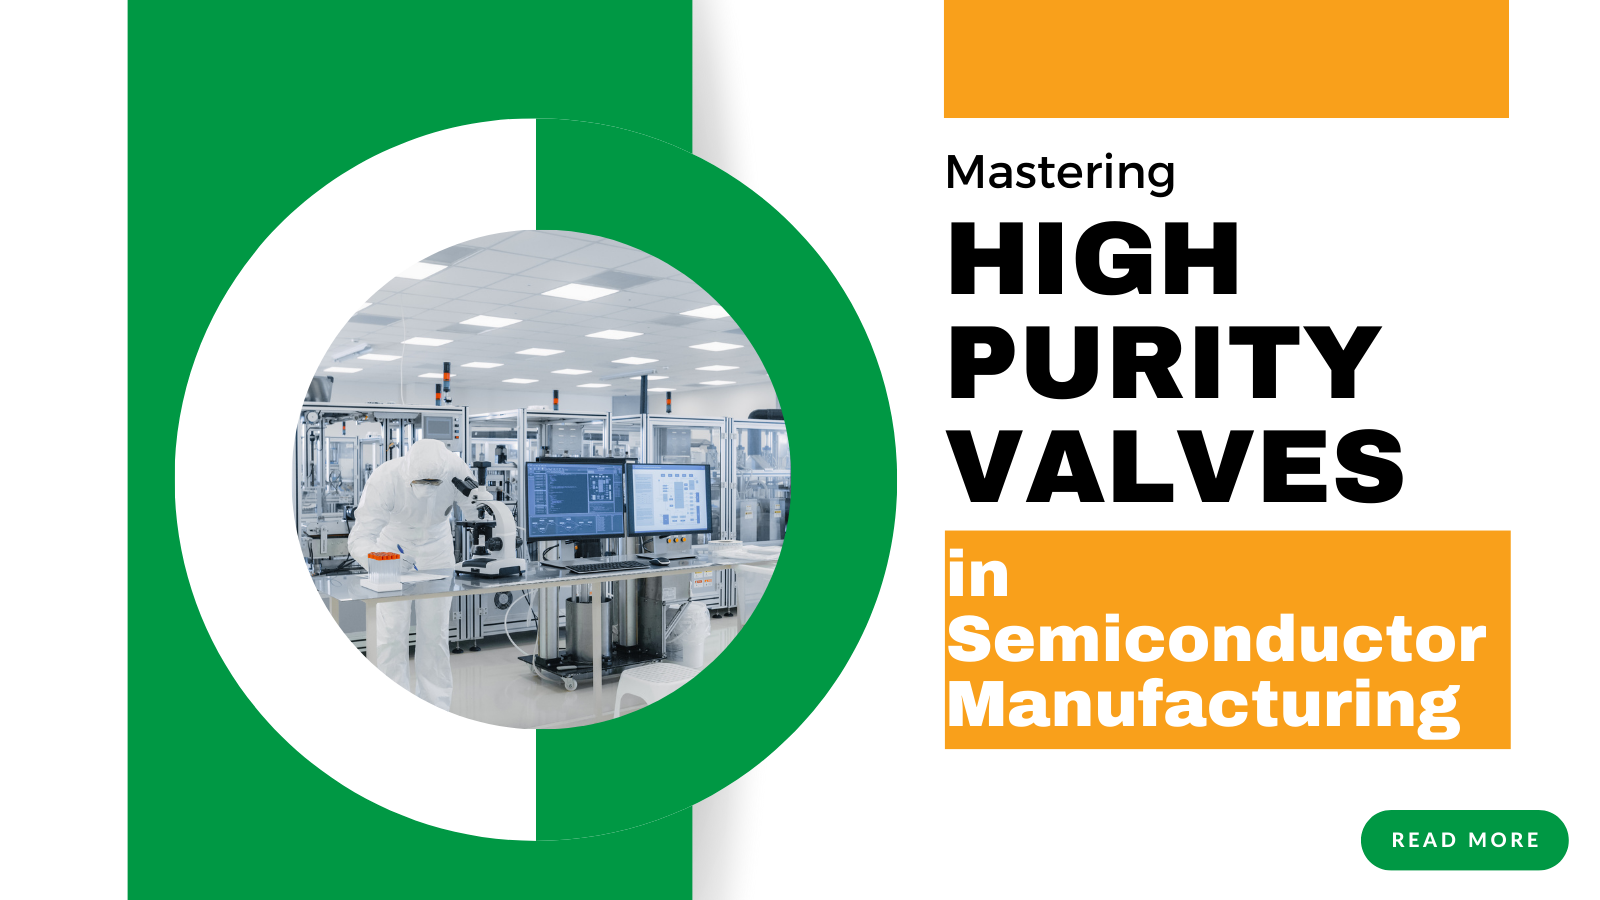 Mastering High Purity Valves in Semiconductor Manufacturing | INOX-TEK